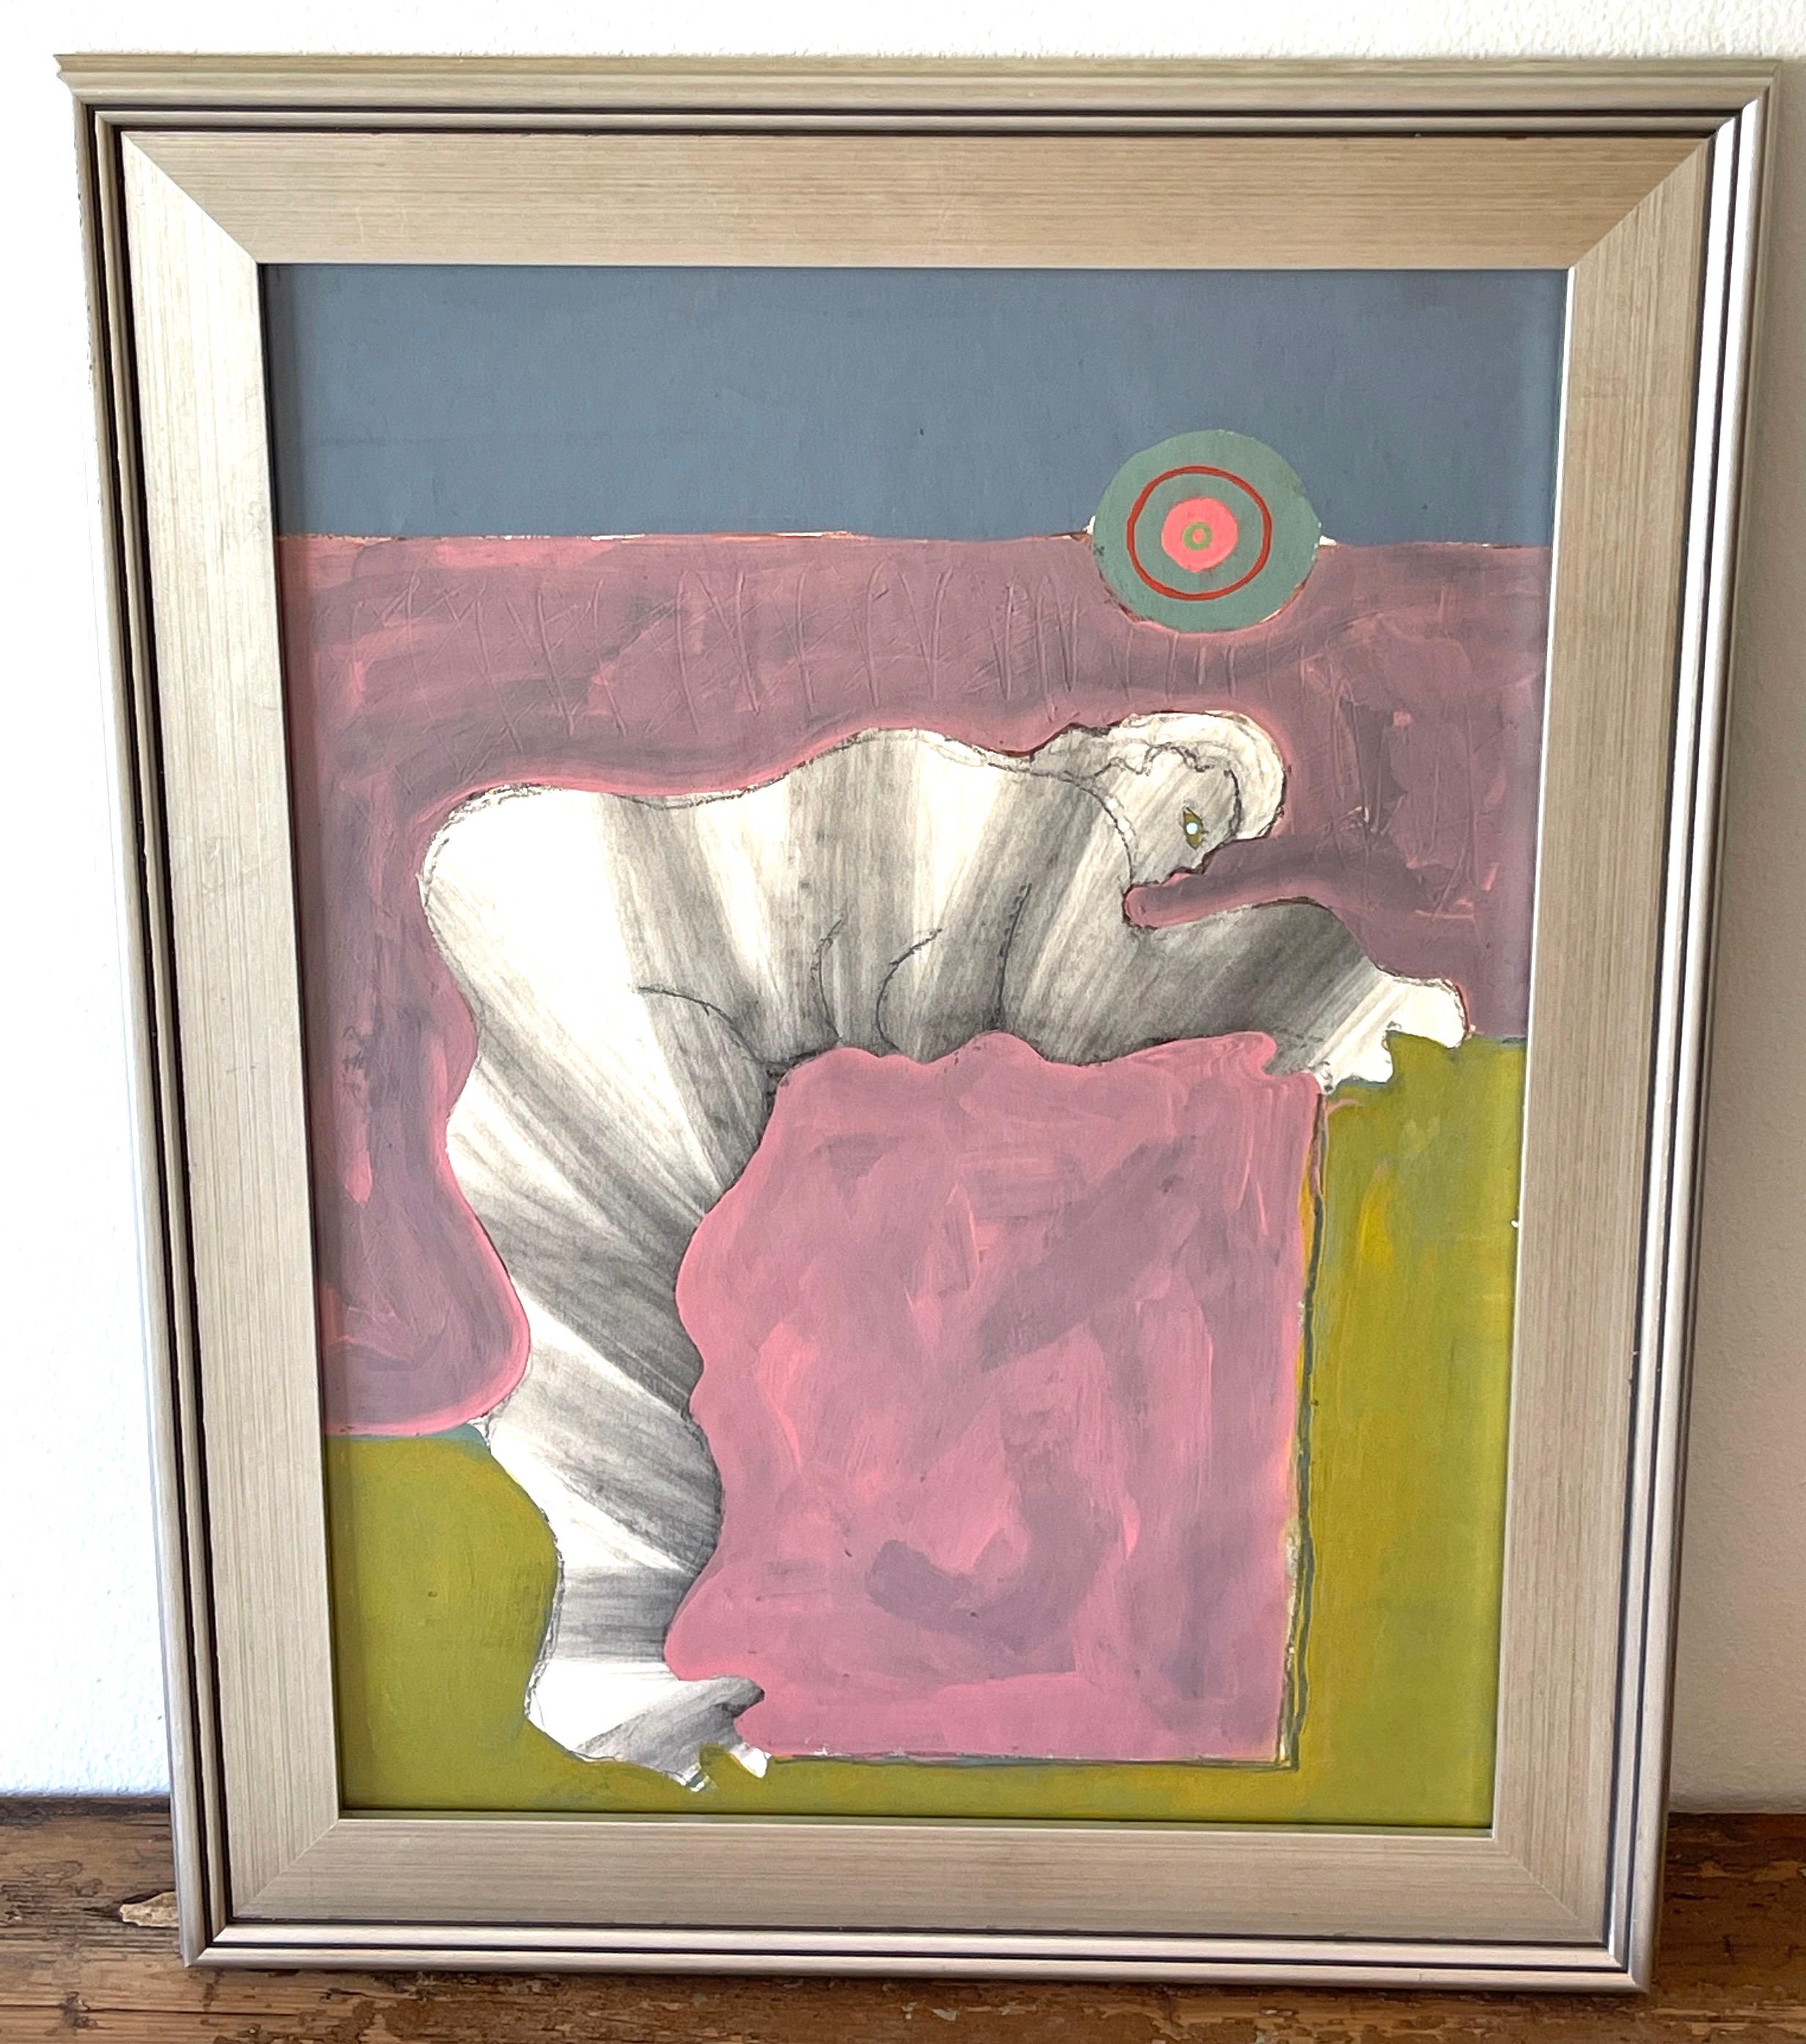 Modern 'Study of Human Form' Oil/Mixed Media on Paper, 1960s by Douglas D. Peden For Sale